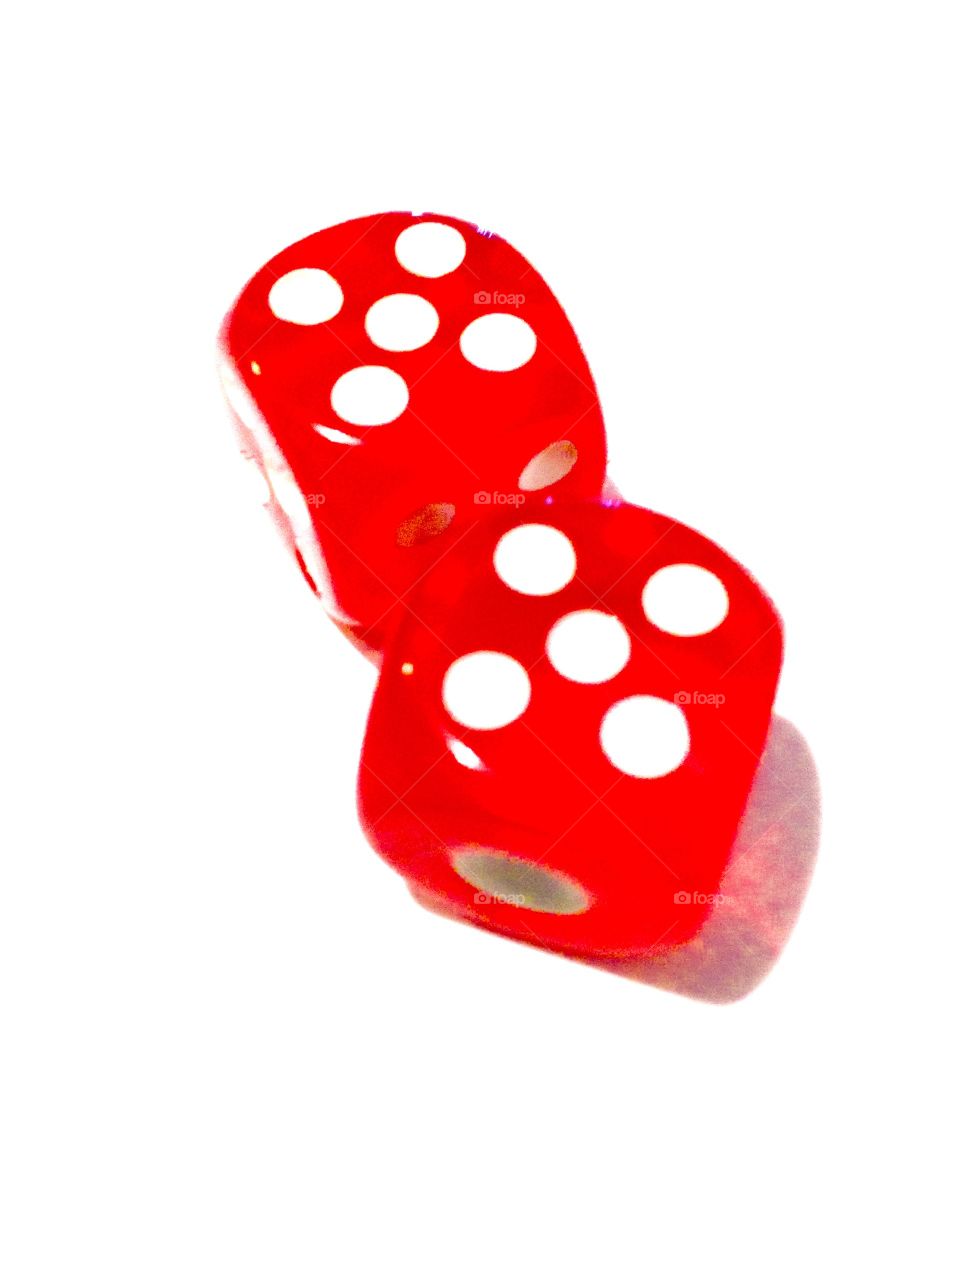 Double Red Dice

Published by:
HappyBrownMonkey 